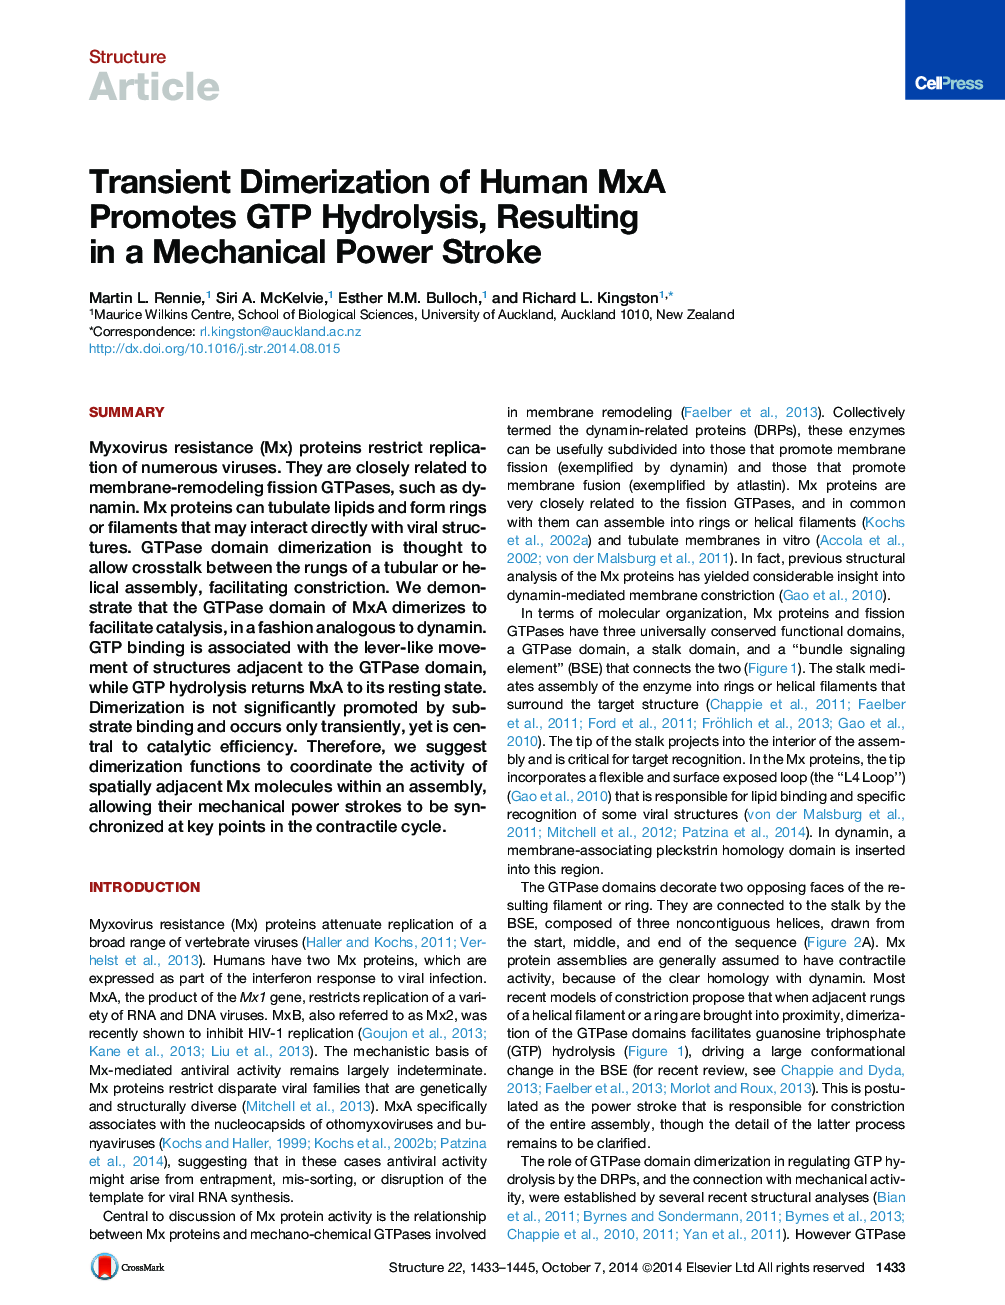 Transient Dimerization of Human MxA Promotes GTP Hydrolysis, Resulting in a Mechanical Power Stroke